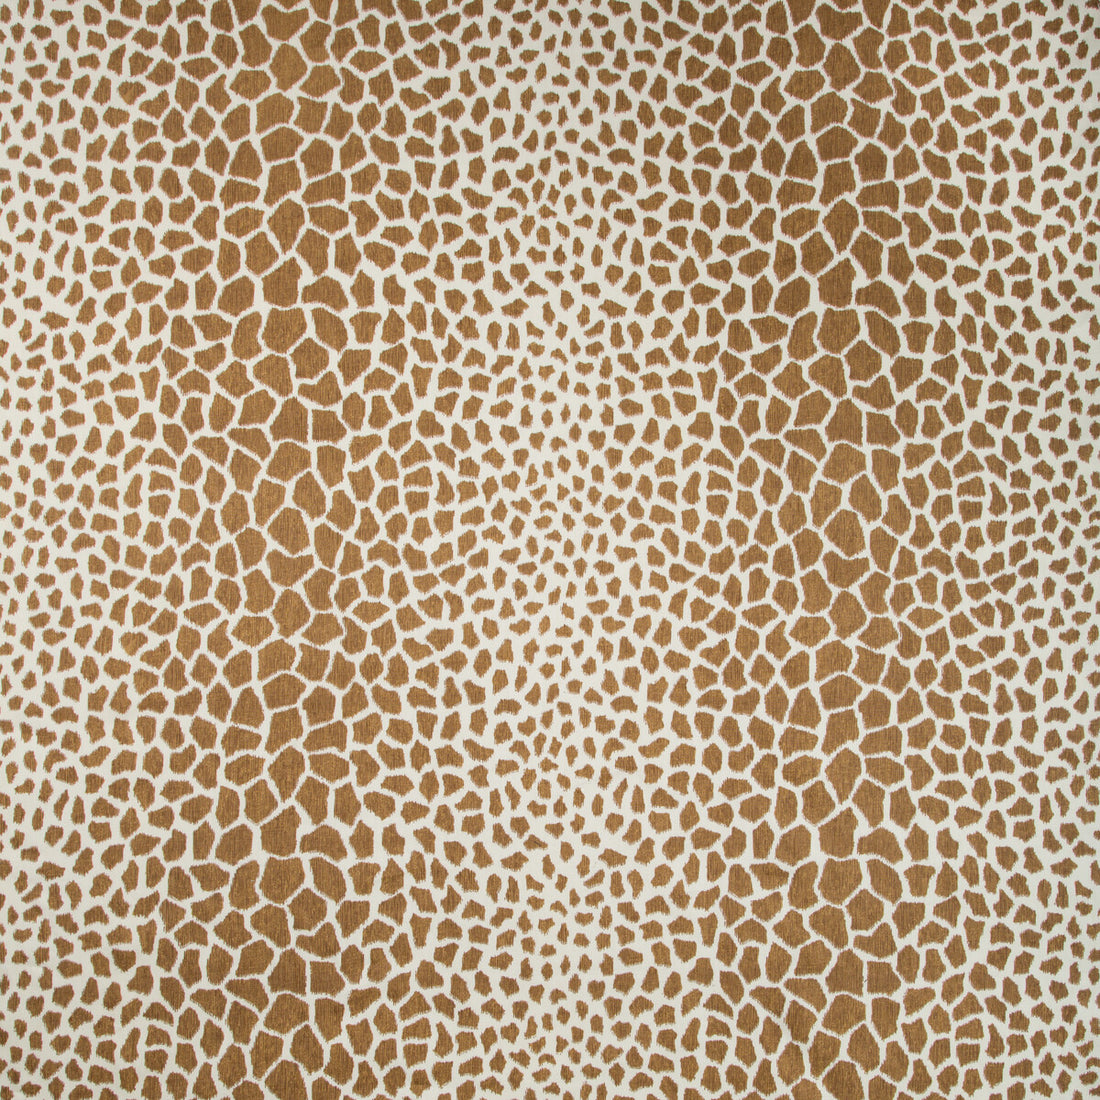 Jiraffa fabric in tan color - pattern 8018123.16.0 - by Brunschwig &amp; Fils in the Baret collection